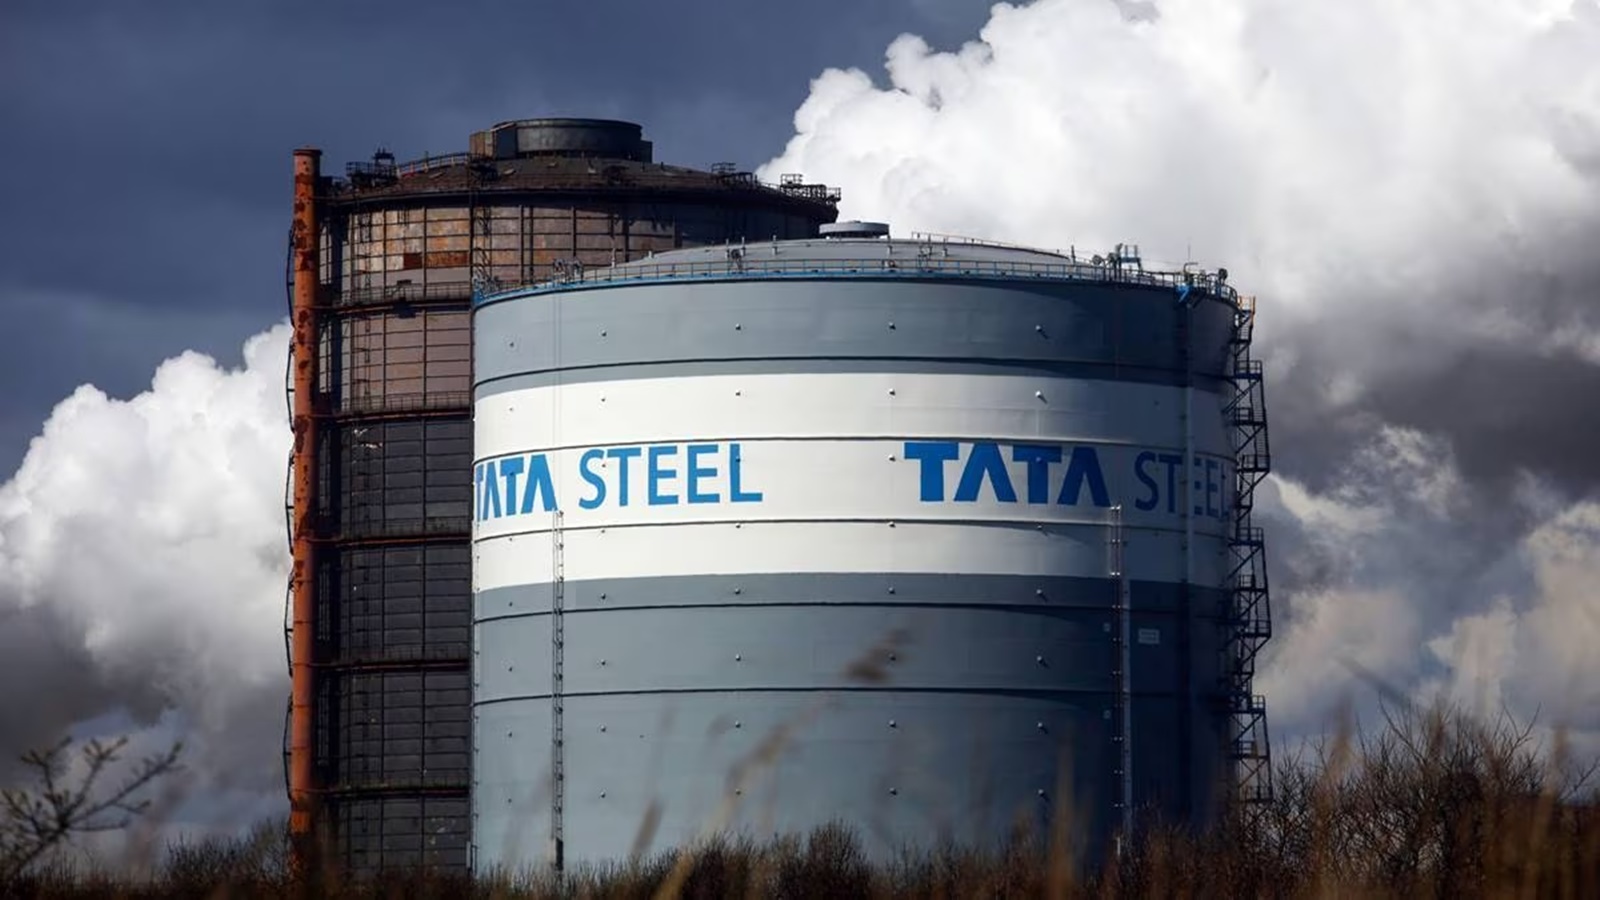 Tata Steel - Tata Steel Netherlands has signed an MoU with